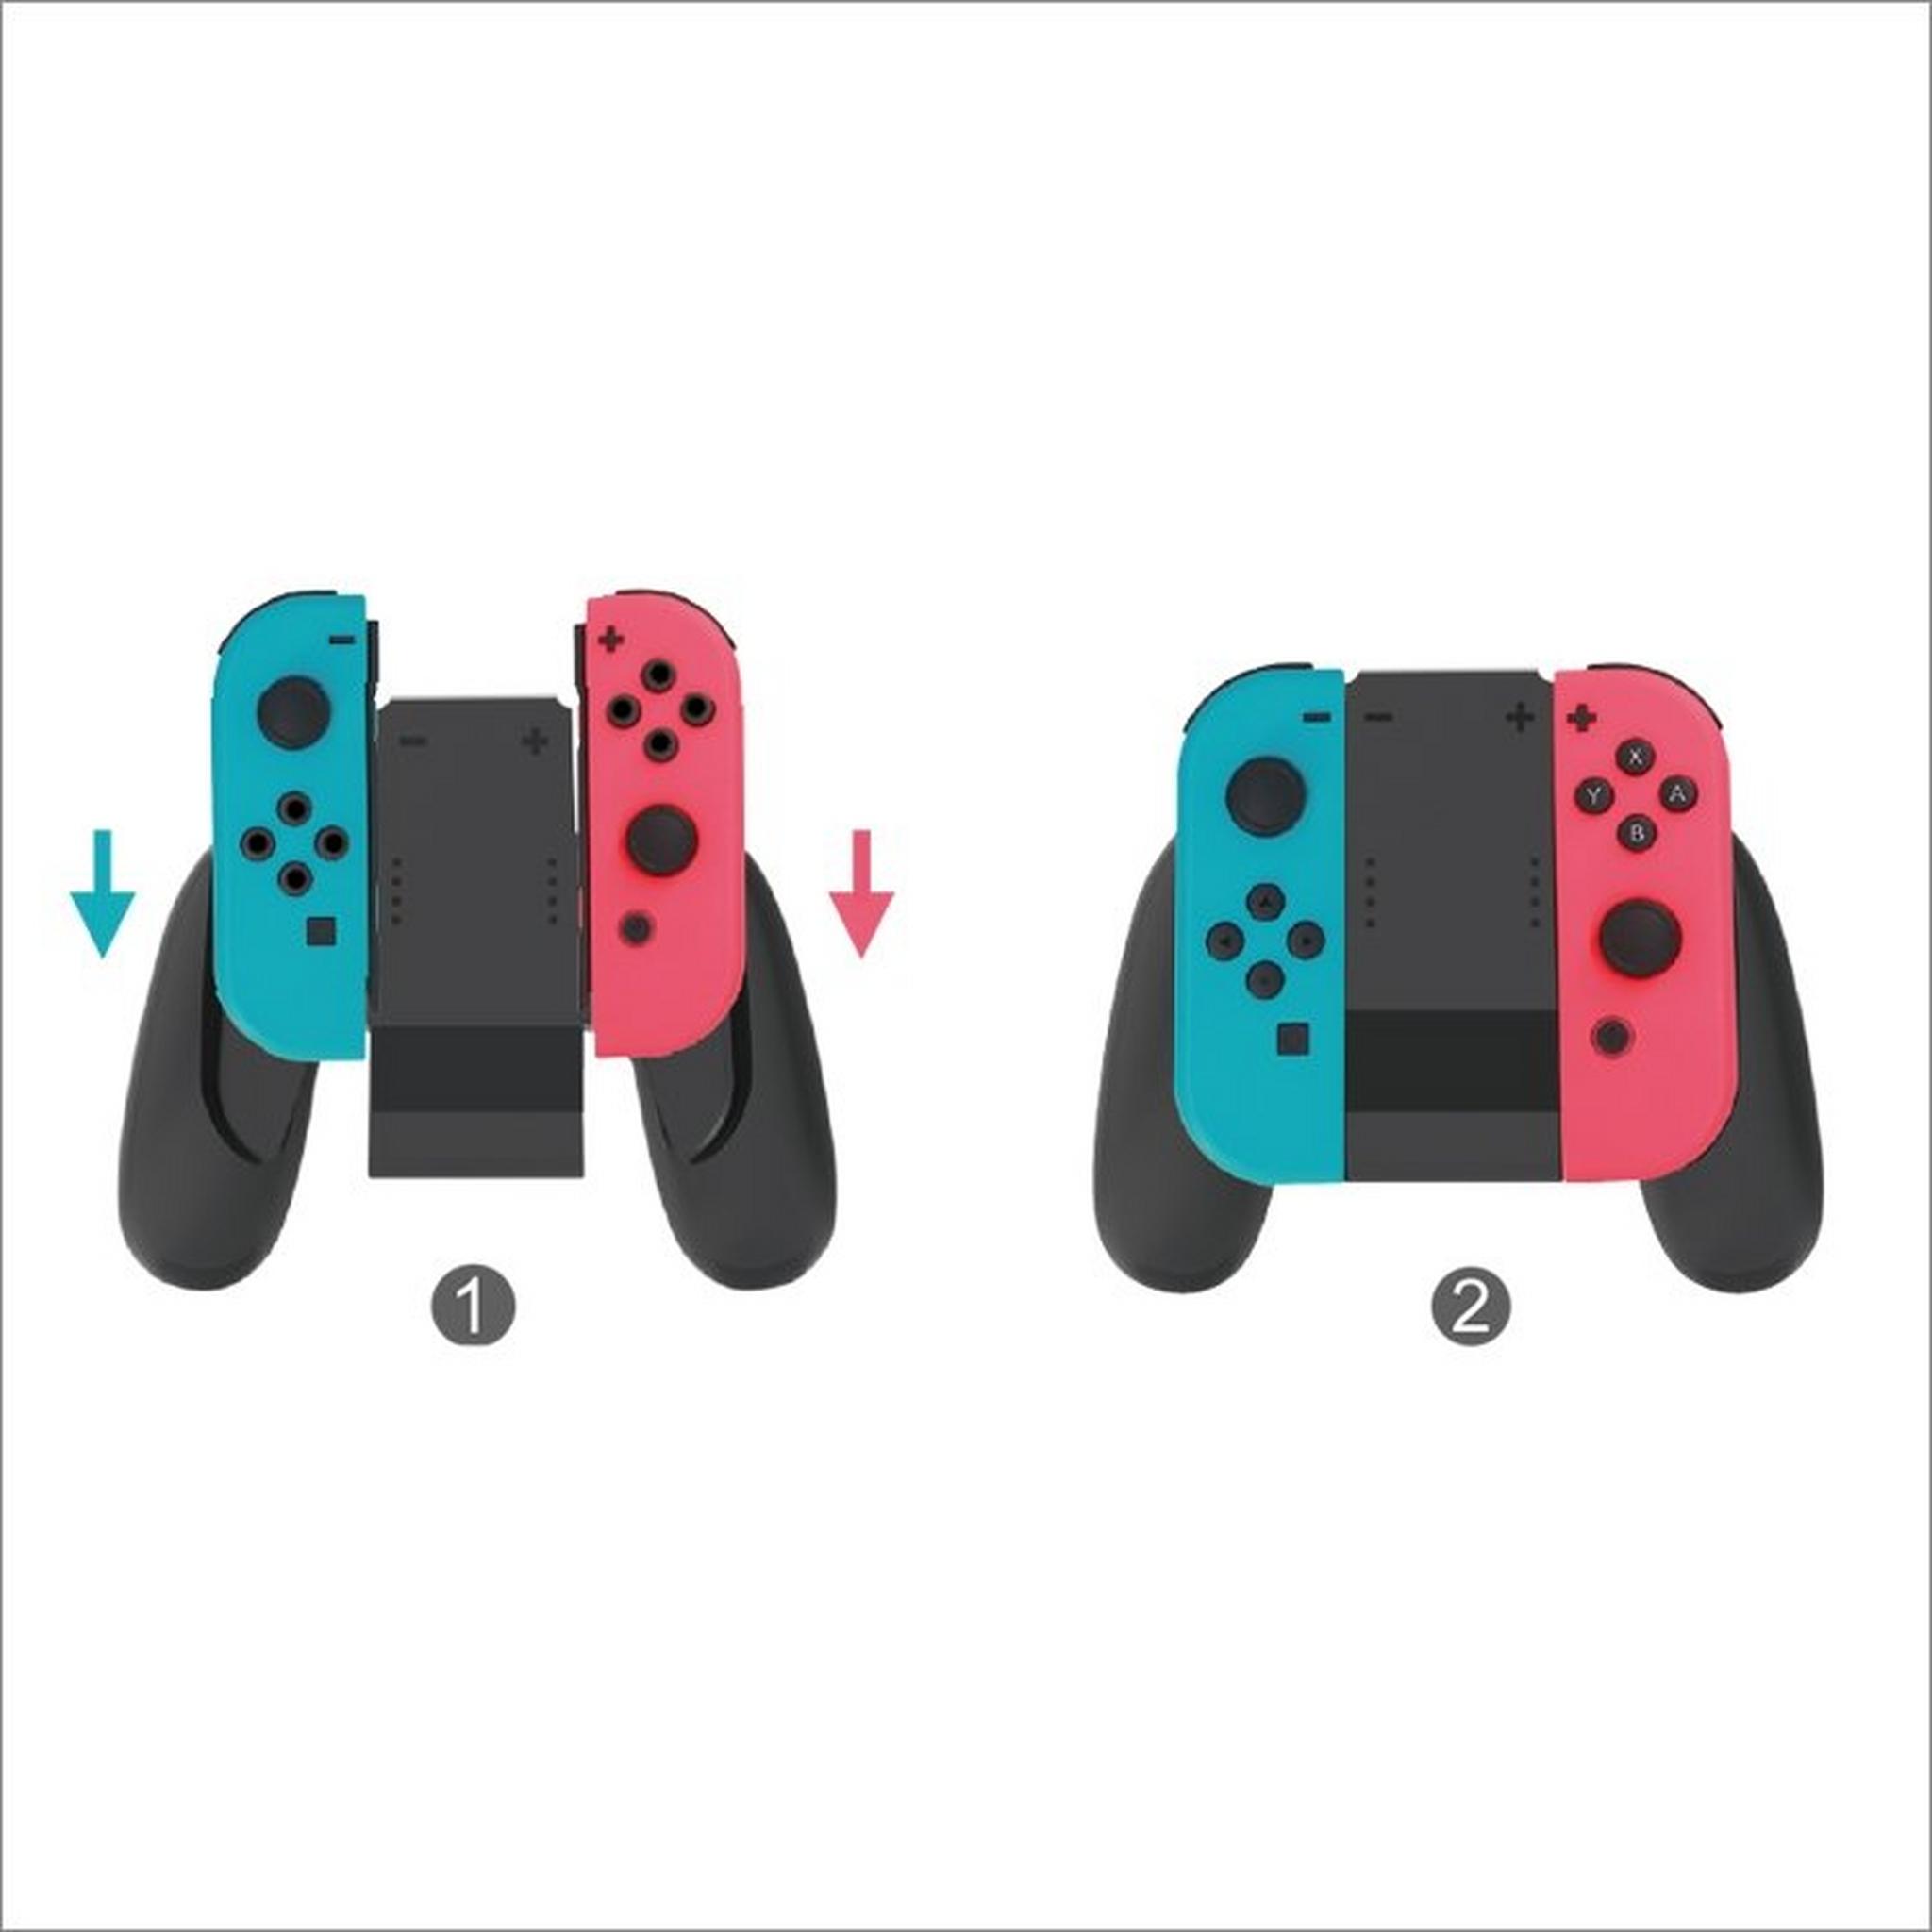 Dobe Charging Grip with 1800mAh Battery Stand Holder For Nintendo Switch Joy Cons Charger